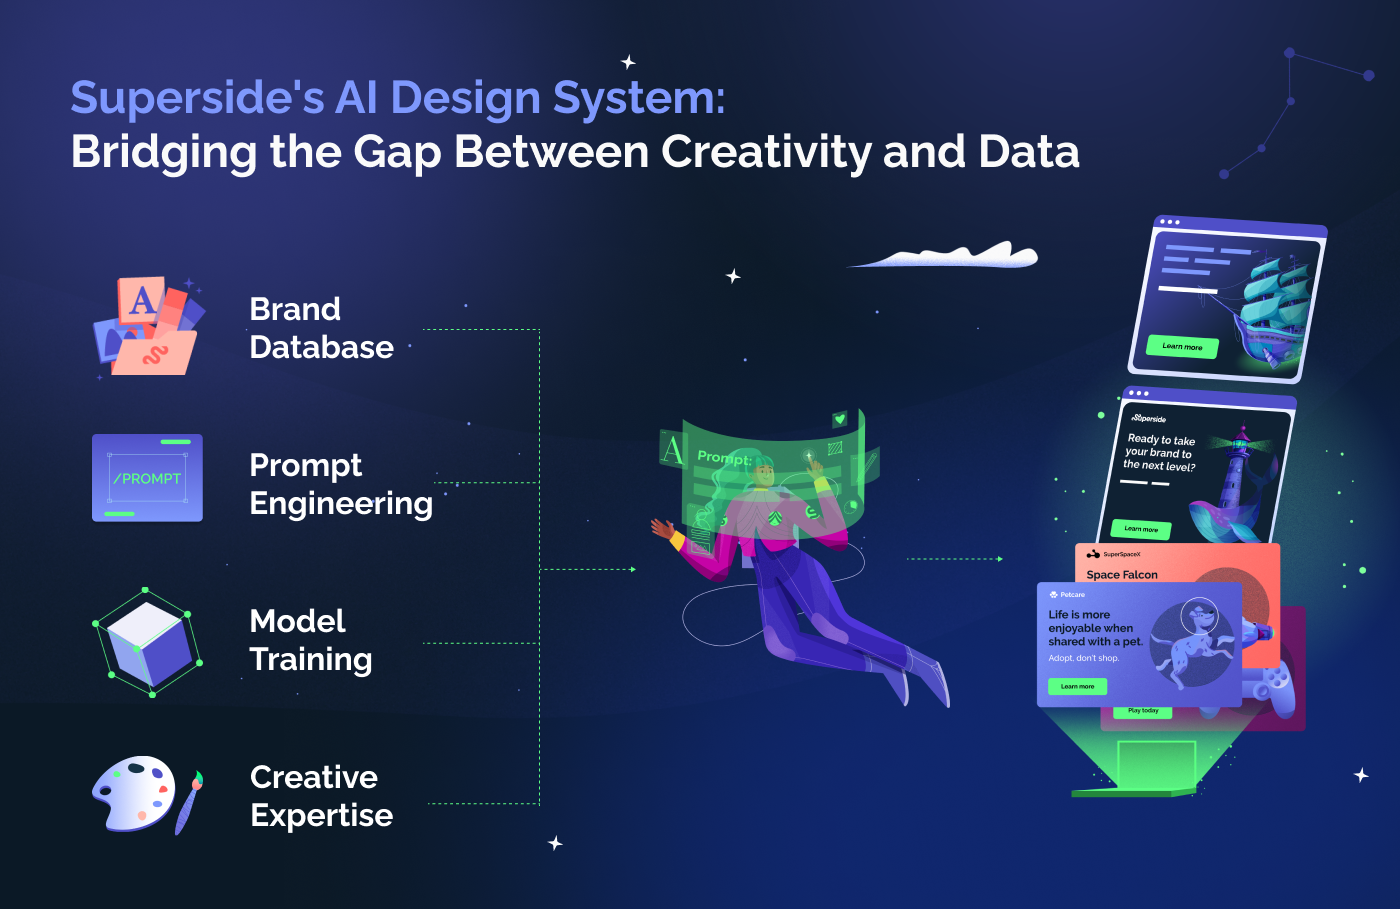 Superside's AI Design System: Bridging the Gap Between Creativity and Data